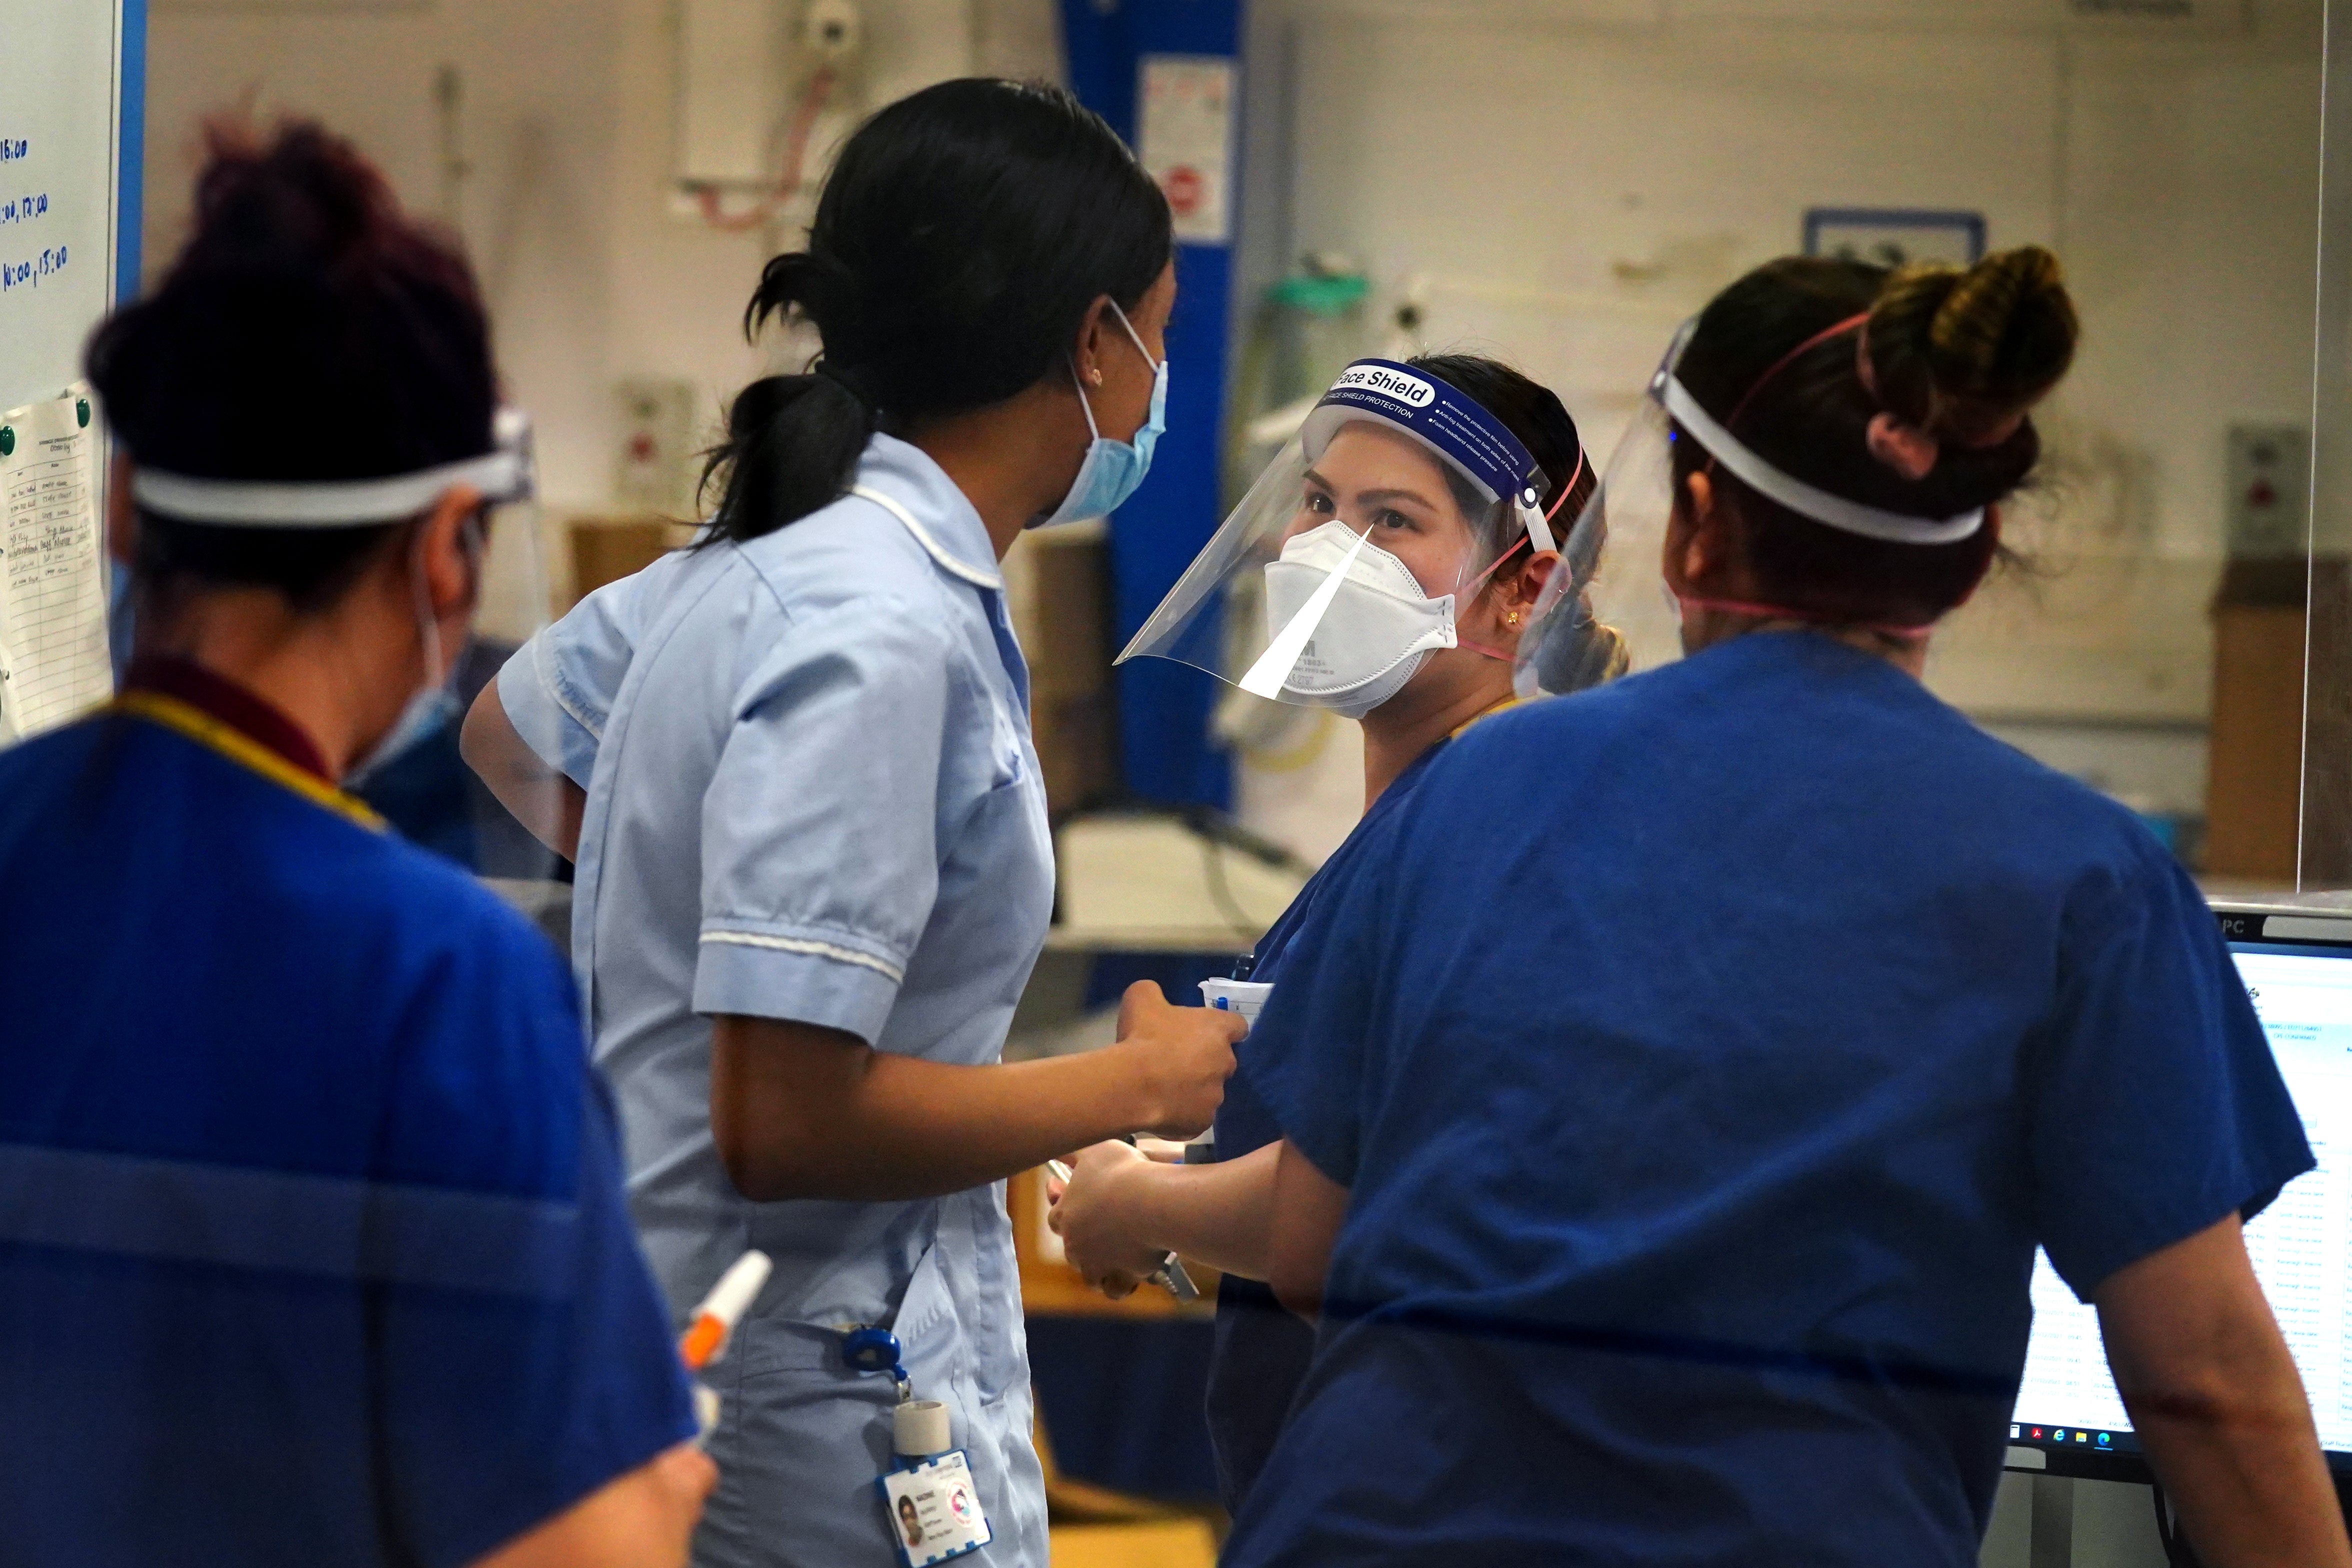 Medical staff wearing PPE on NHS ward (Victoria Jones/PA)